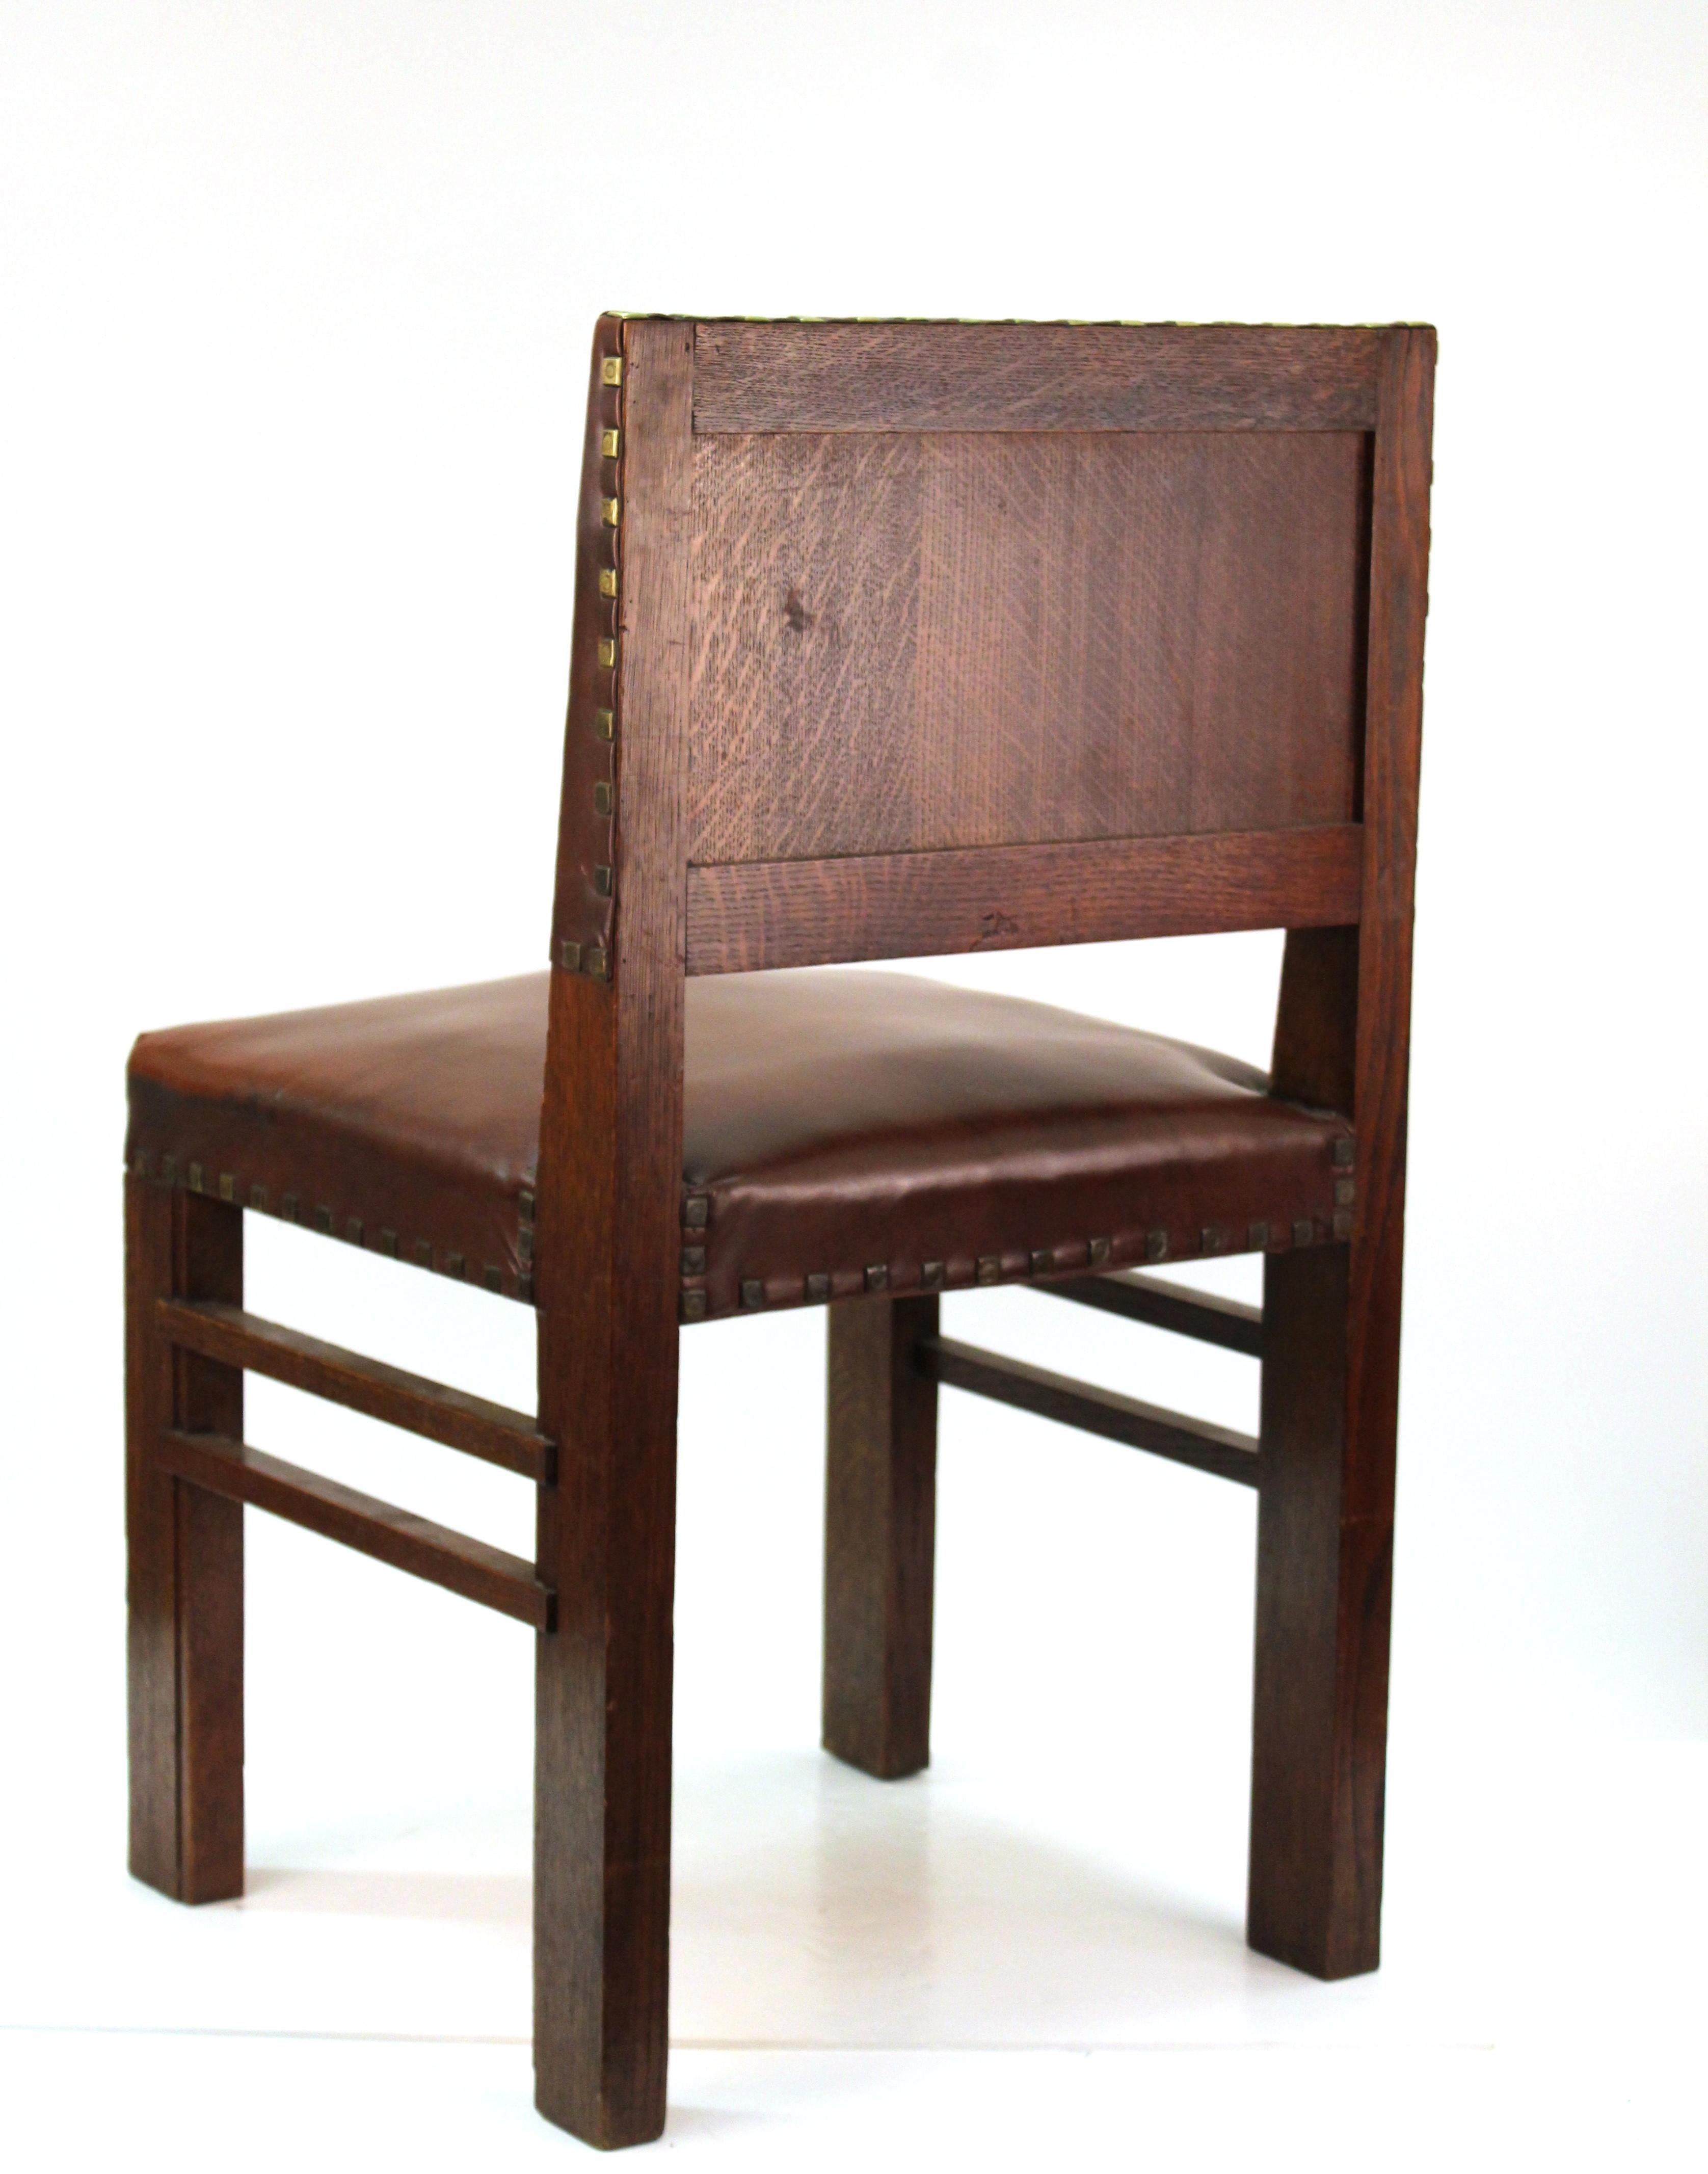 Early 20th Century American Arts & Crafts Oak Chairs with Cognac Colored Leather Seats For Sale